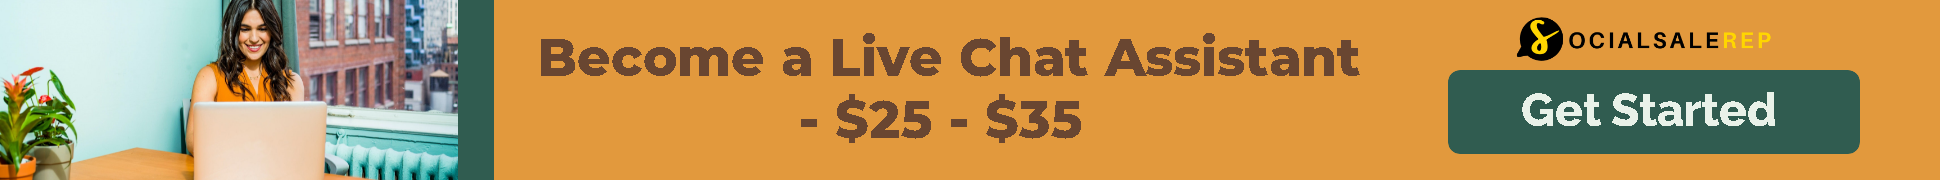 Become a live chat agent and make $25-35!